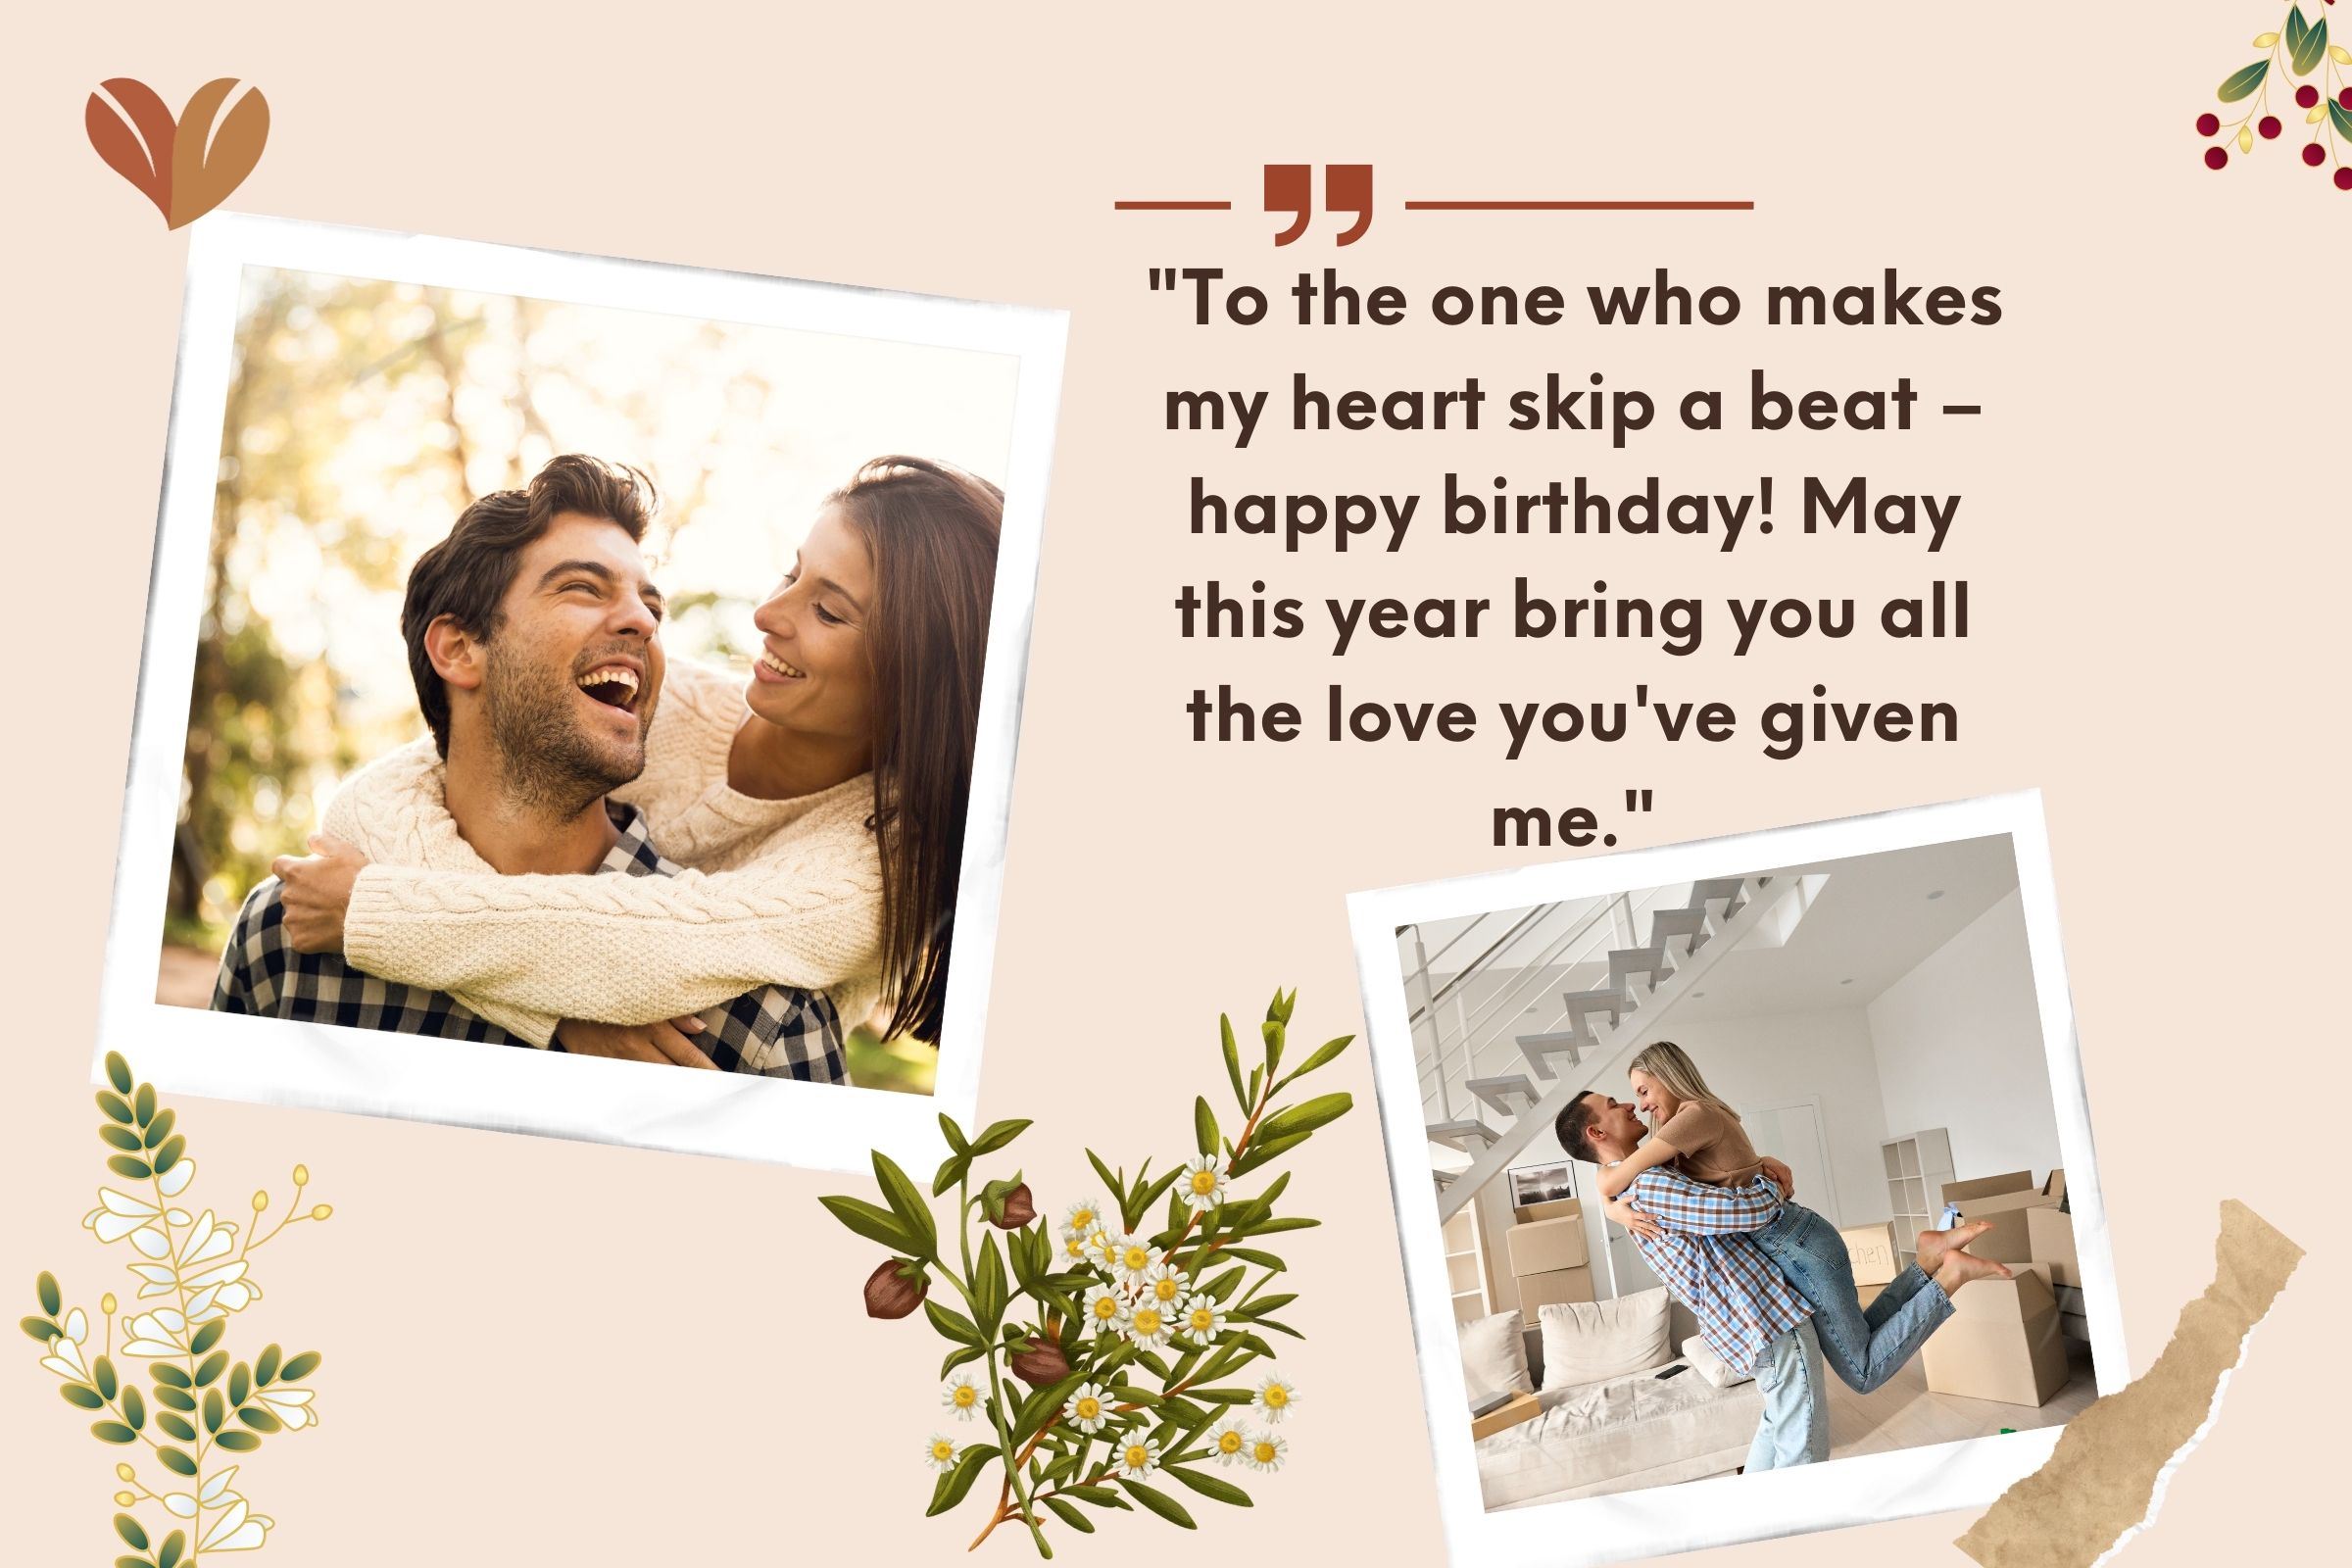 More than just a birthday, it's a symphony of love expressed in sweet messages